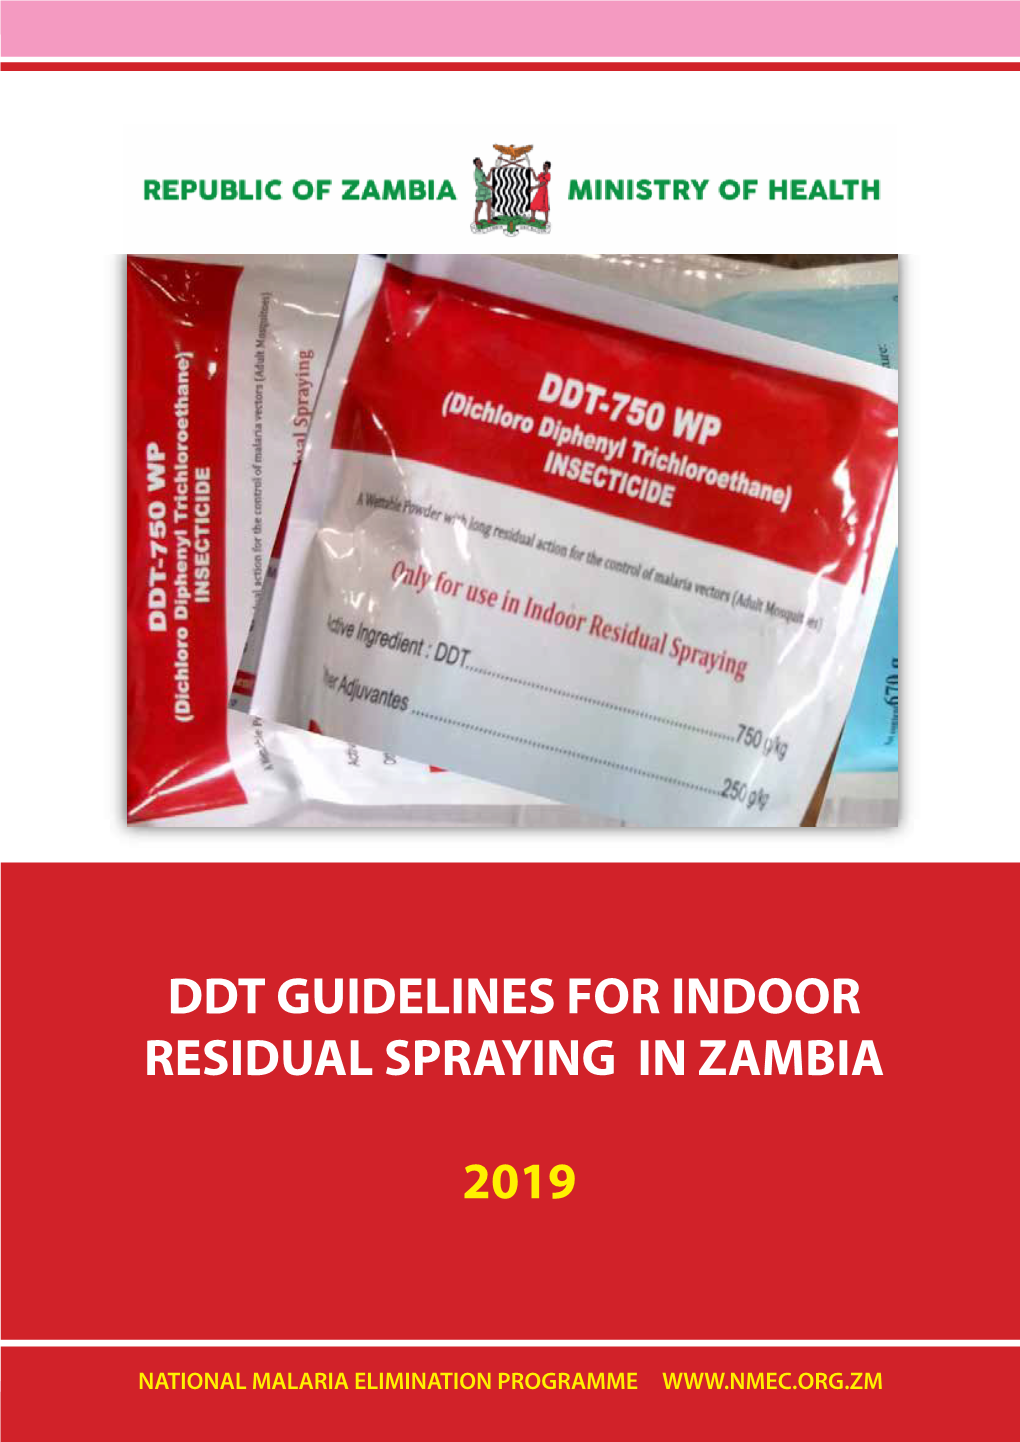 Ddt Guidelines for Indoor Residual Spraying in Zambia - 2019 National Malaria Elimination Programme